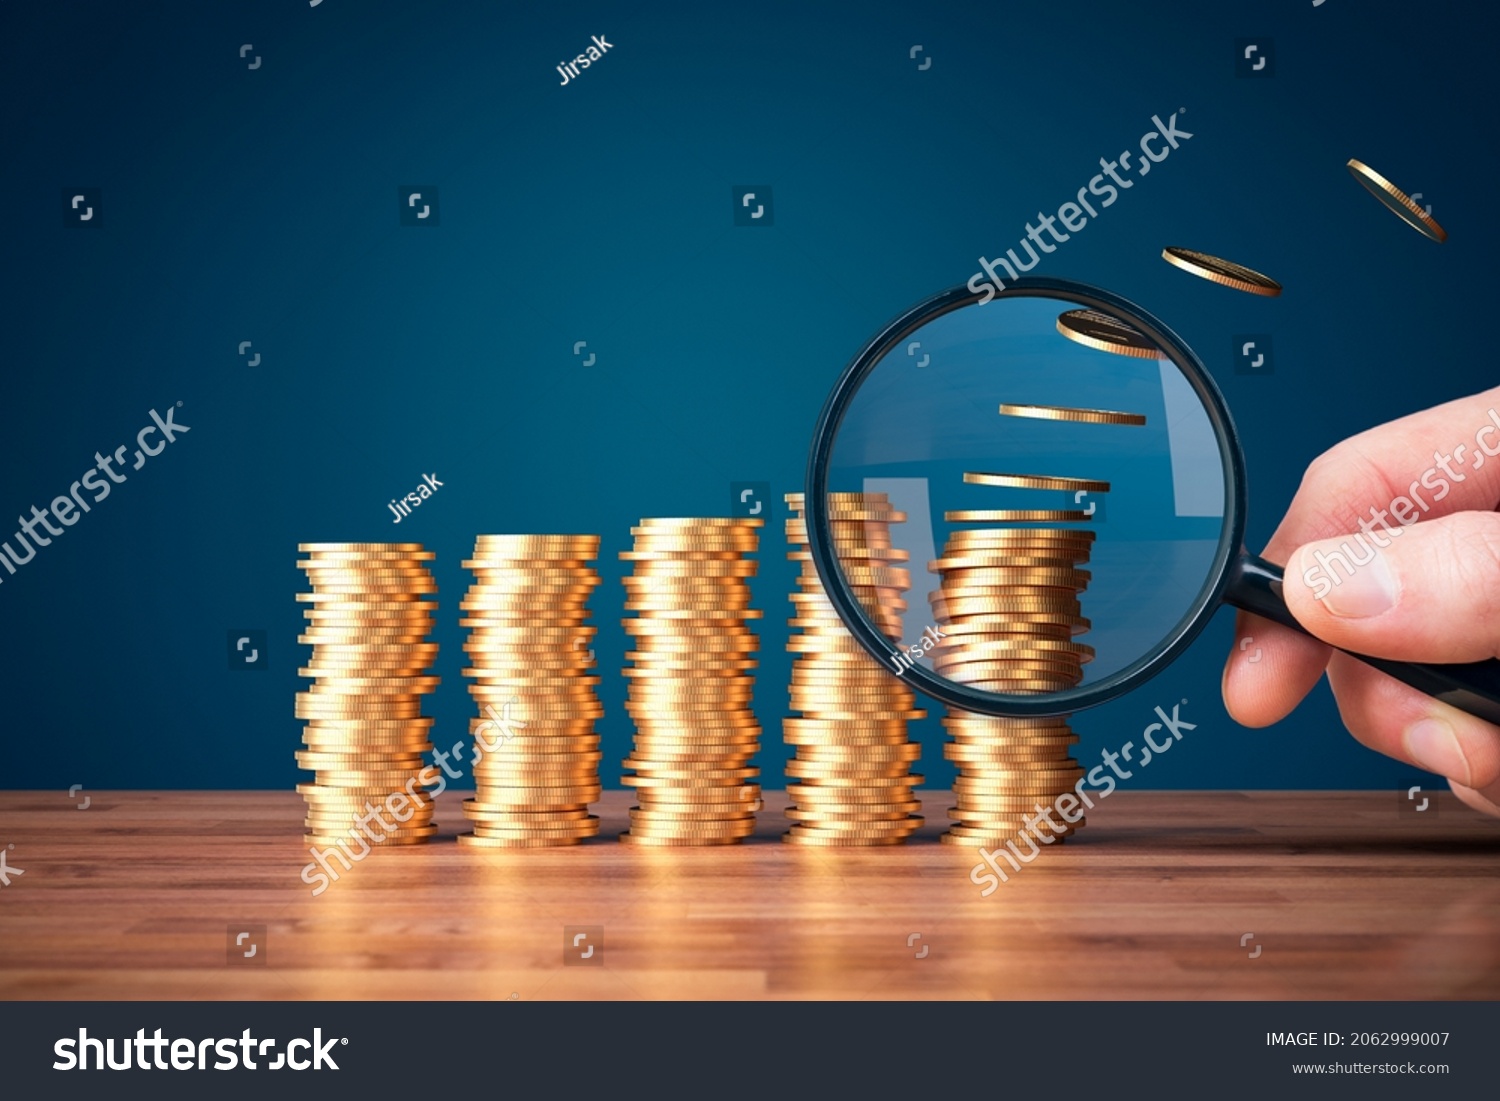 Focus on growing inflation concept. Growing columns of coins, coins fade away from the last column what represents inflation. Post-covid economic consequence. #2062999007